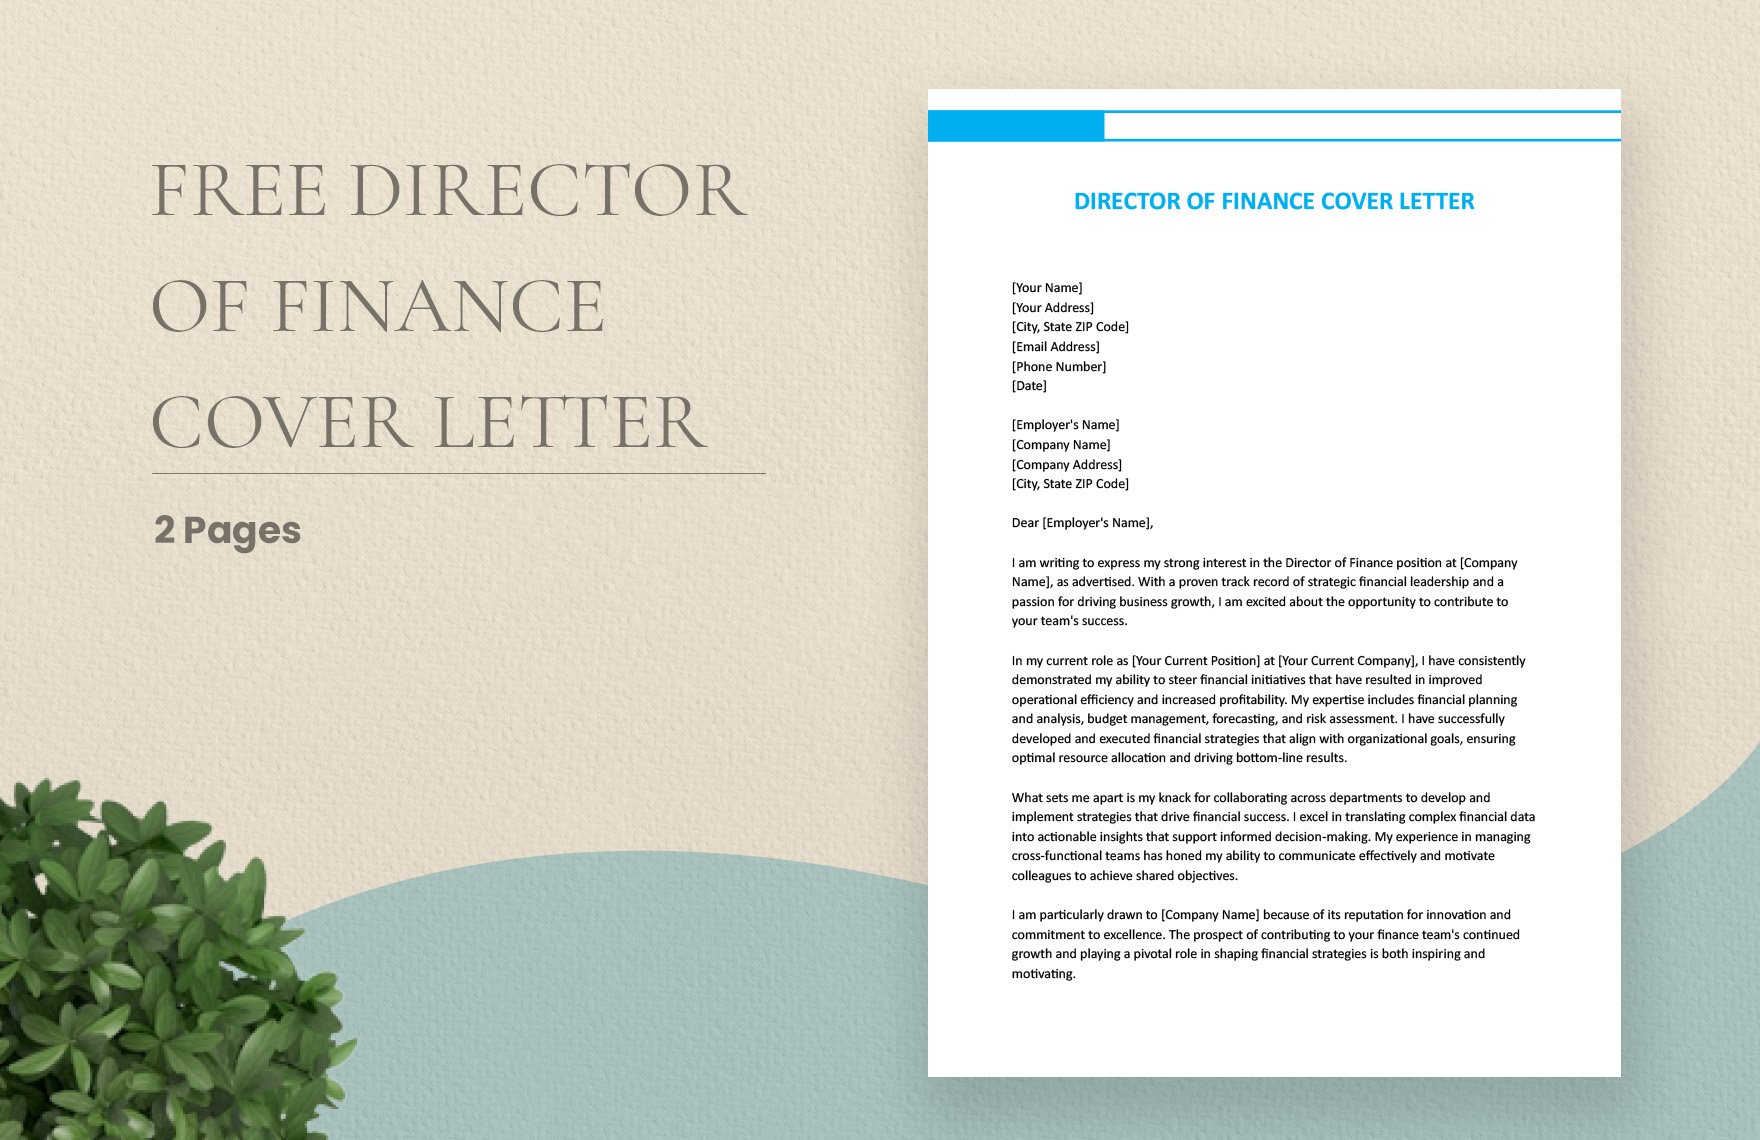 Director of Finance Cover Letter